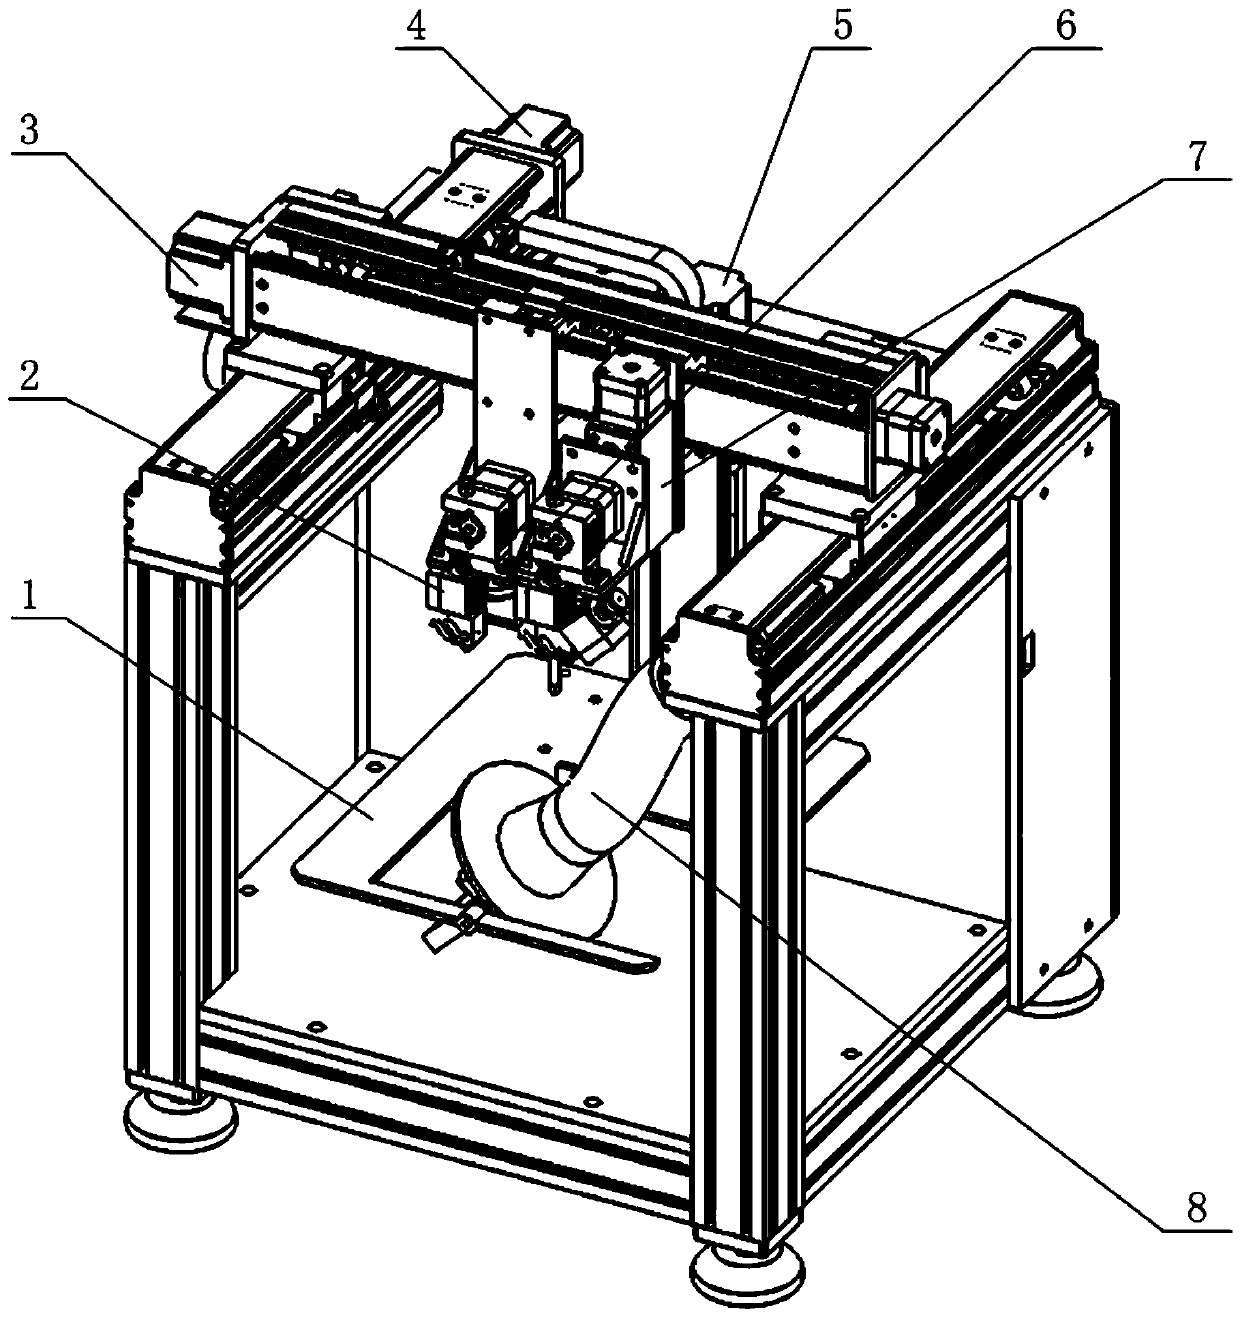 A composite additive manufacturing equipment for continuous fiber thermoplastic material structural parts